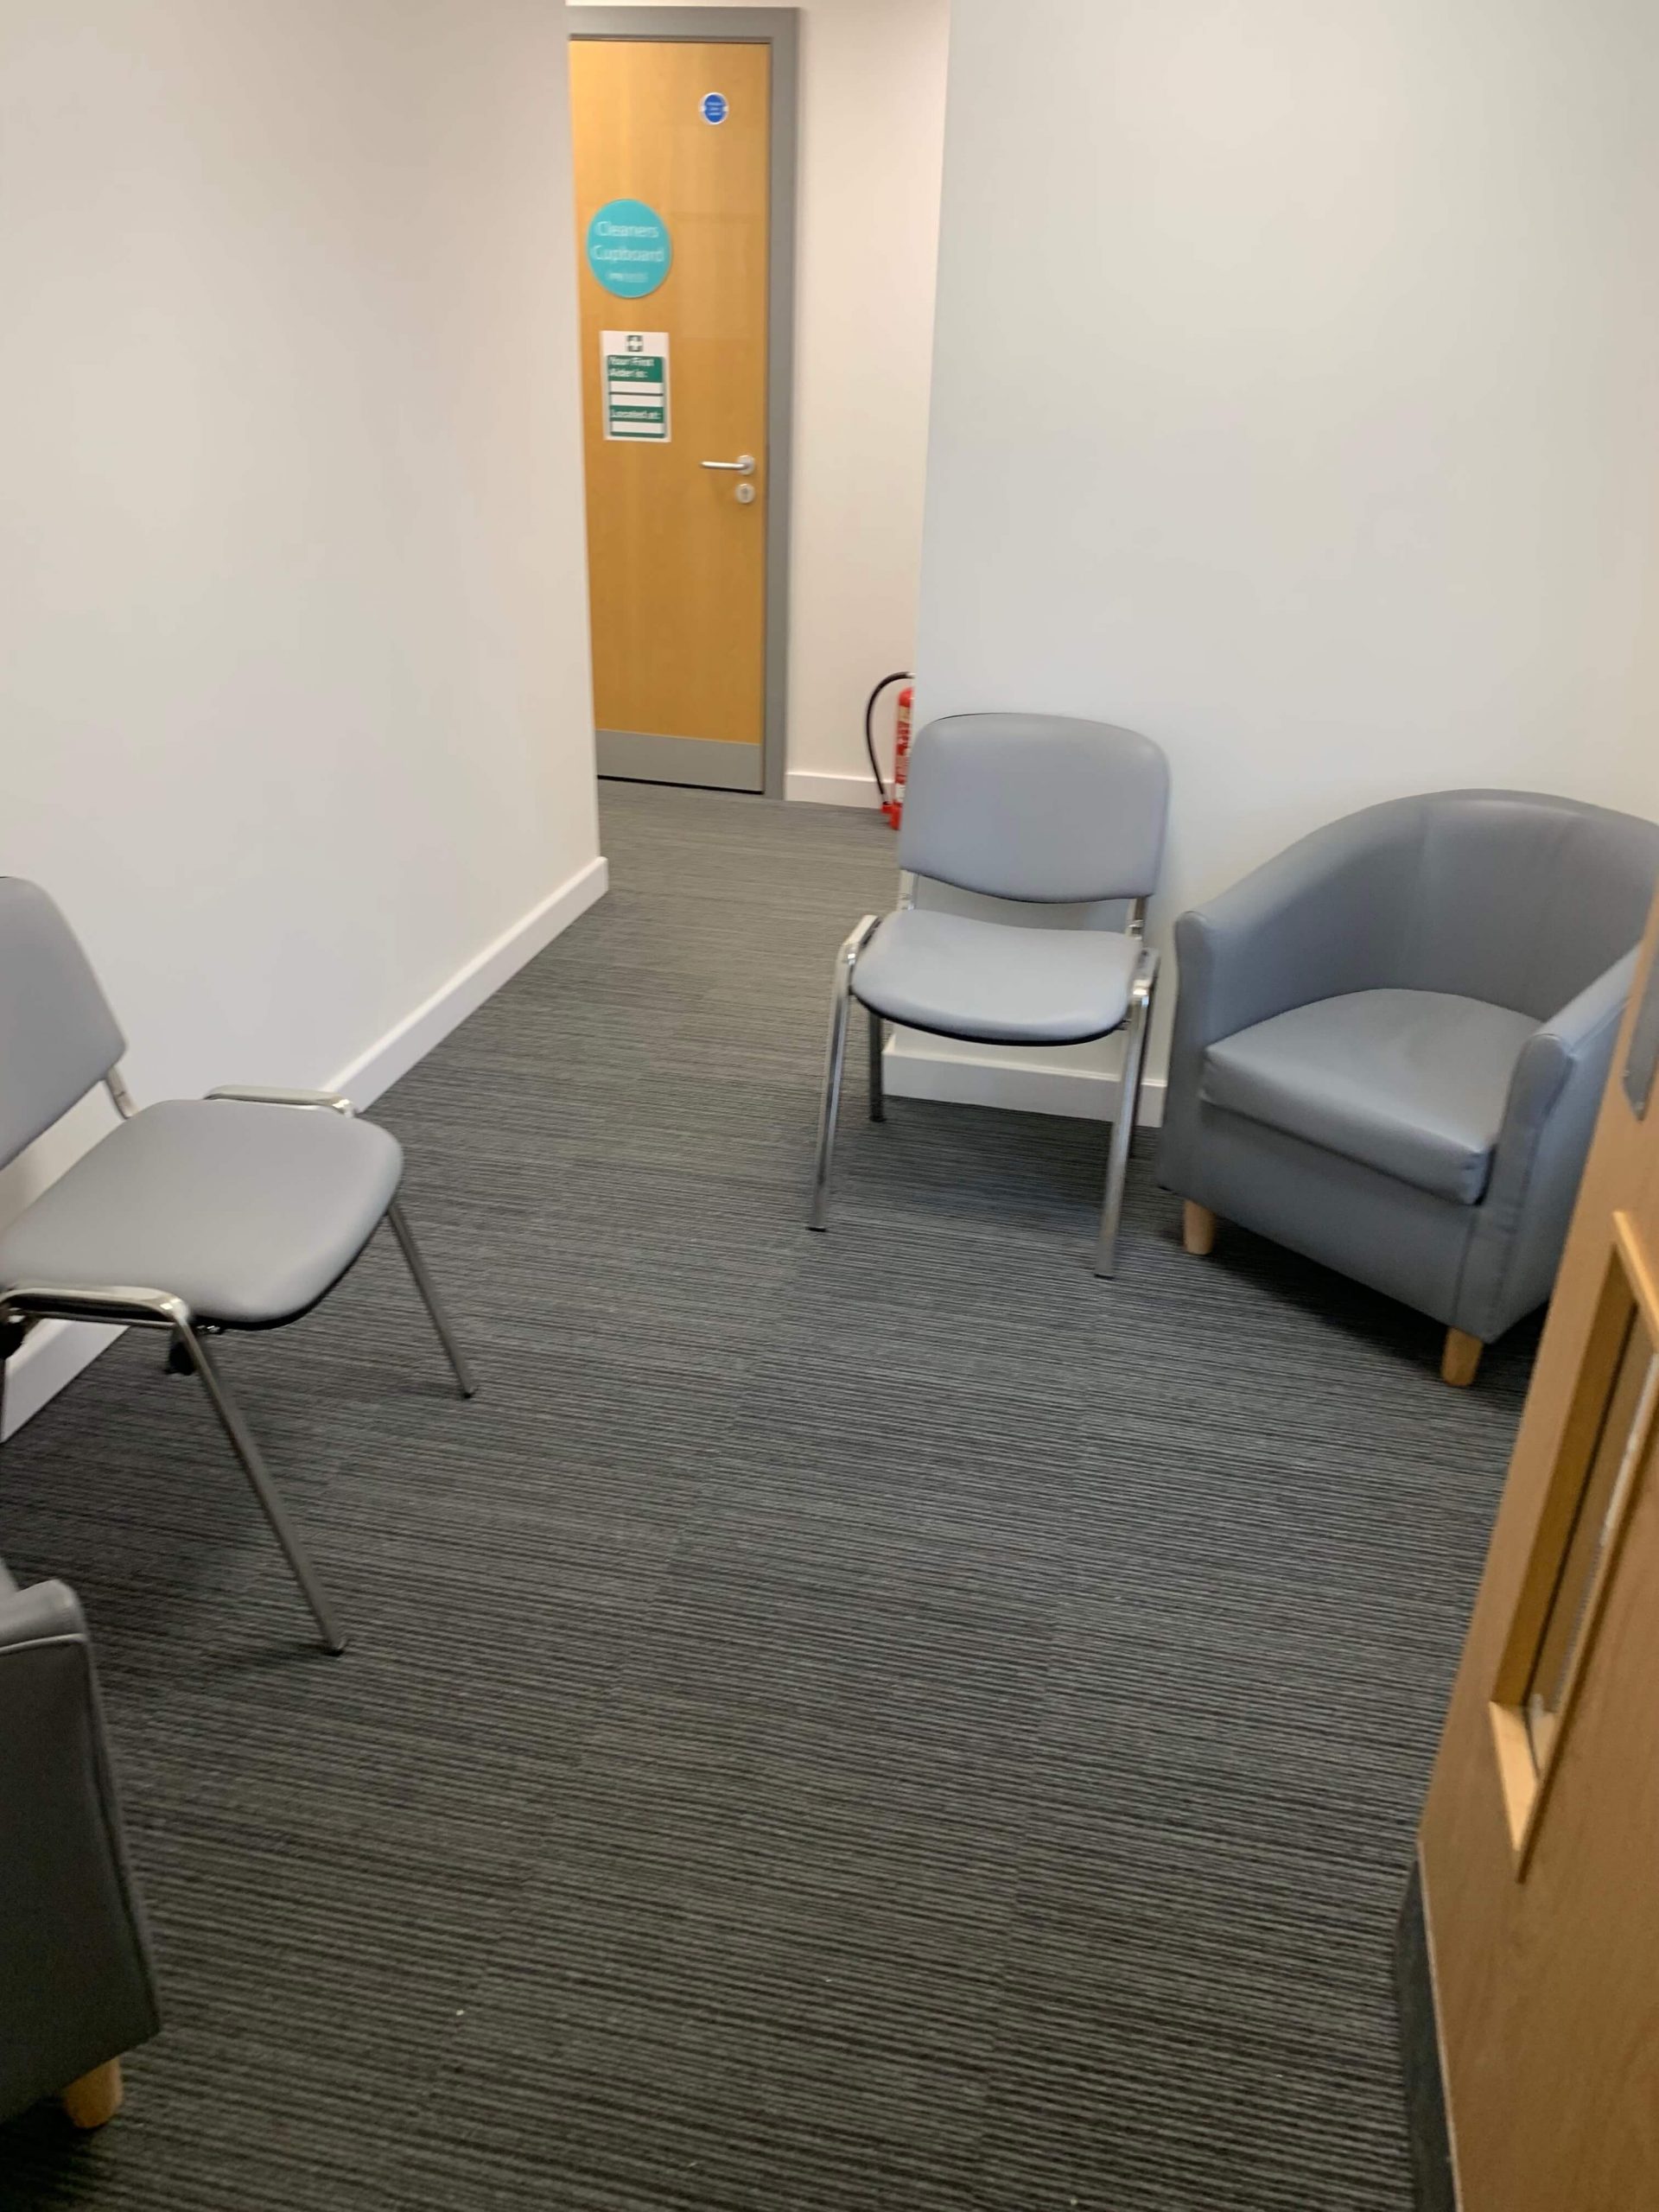 Waiting area for patients in dental suite